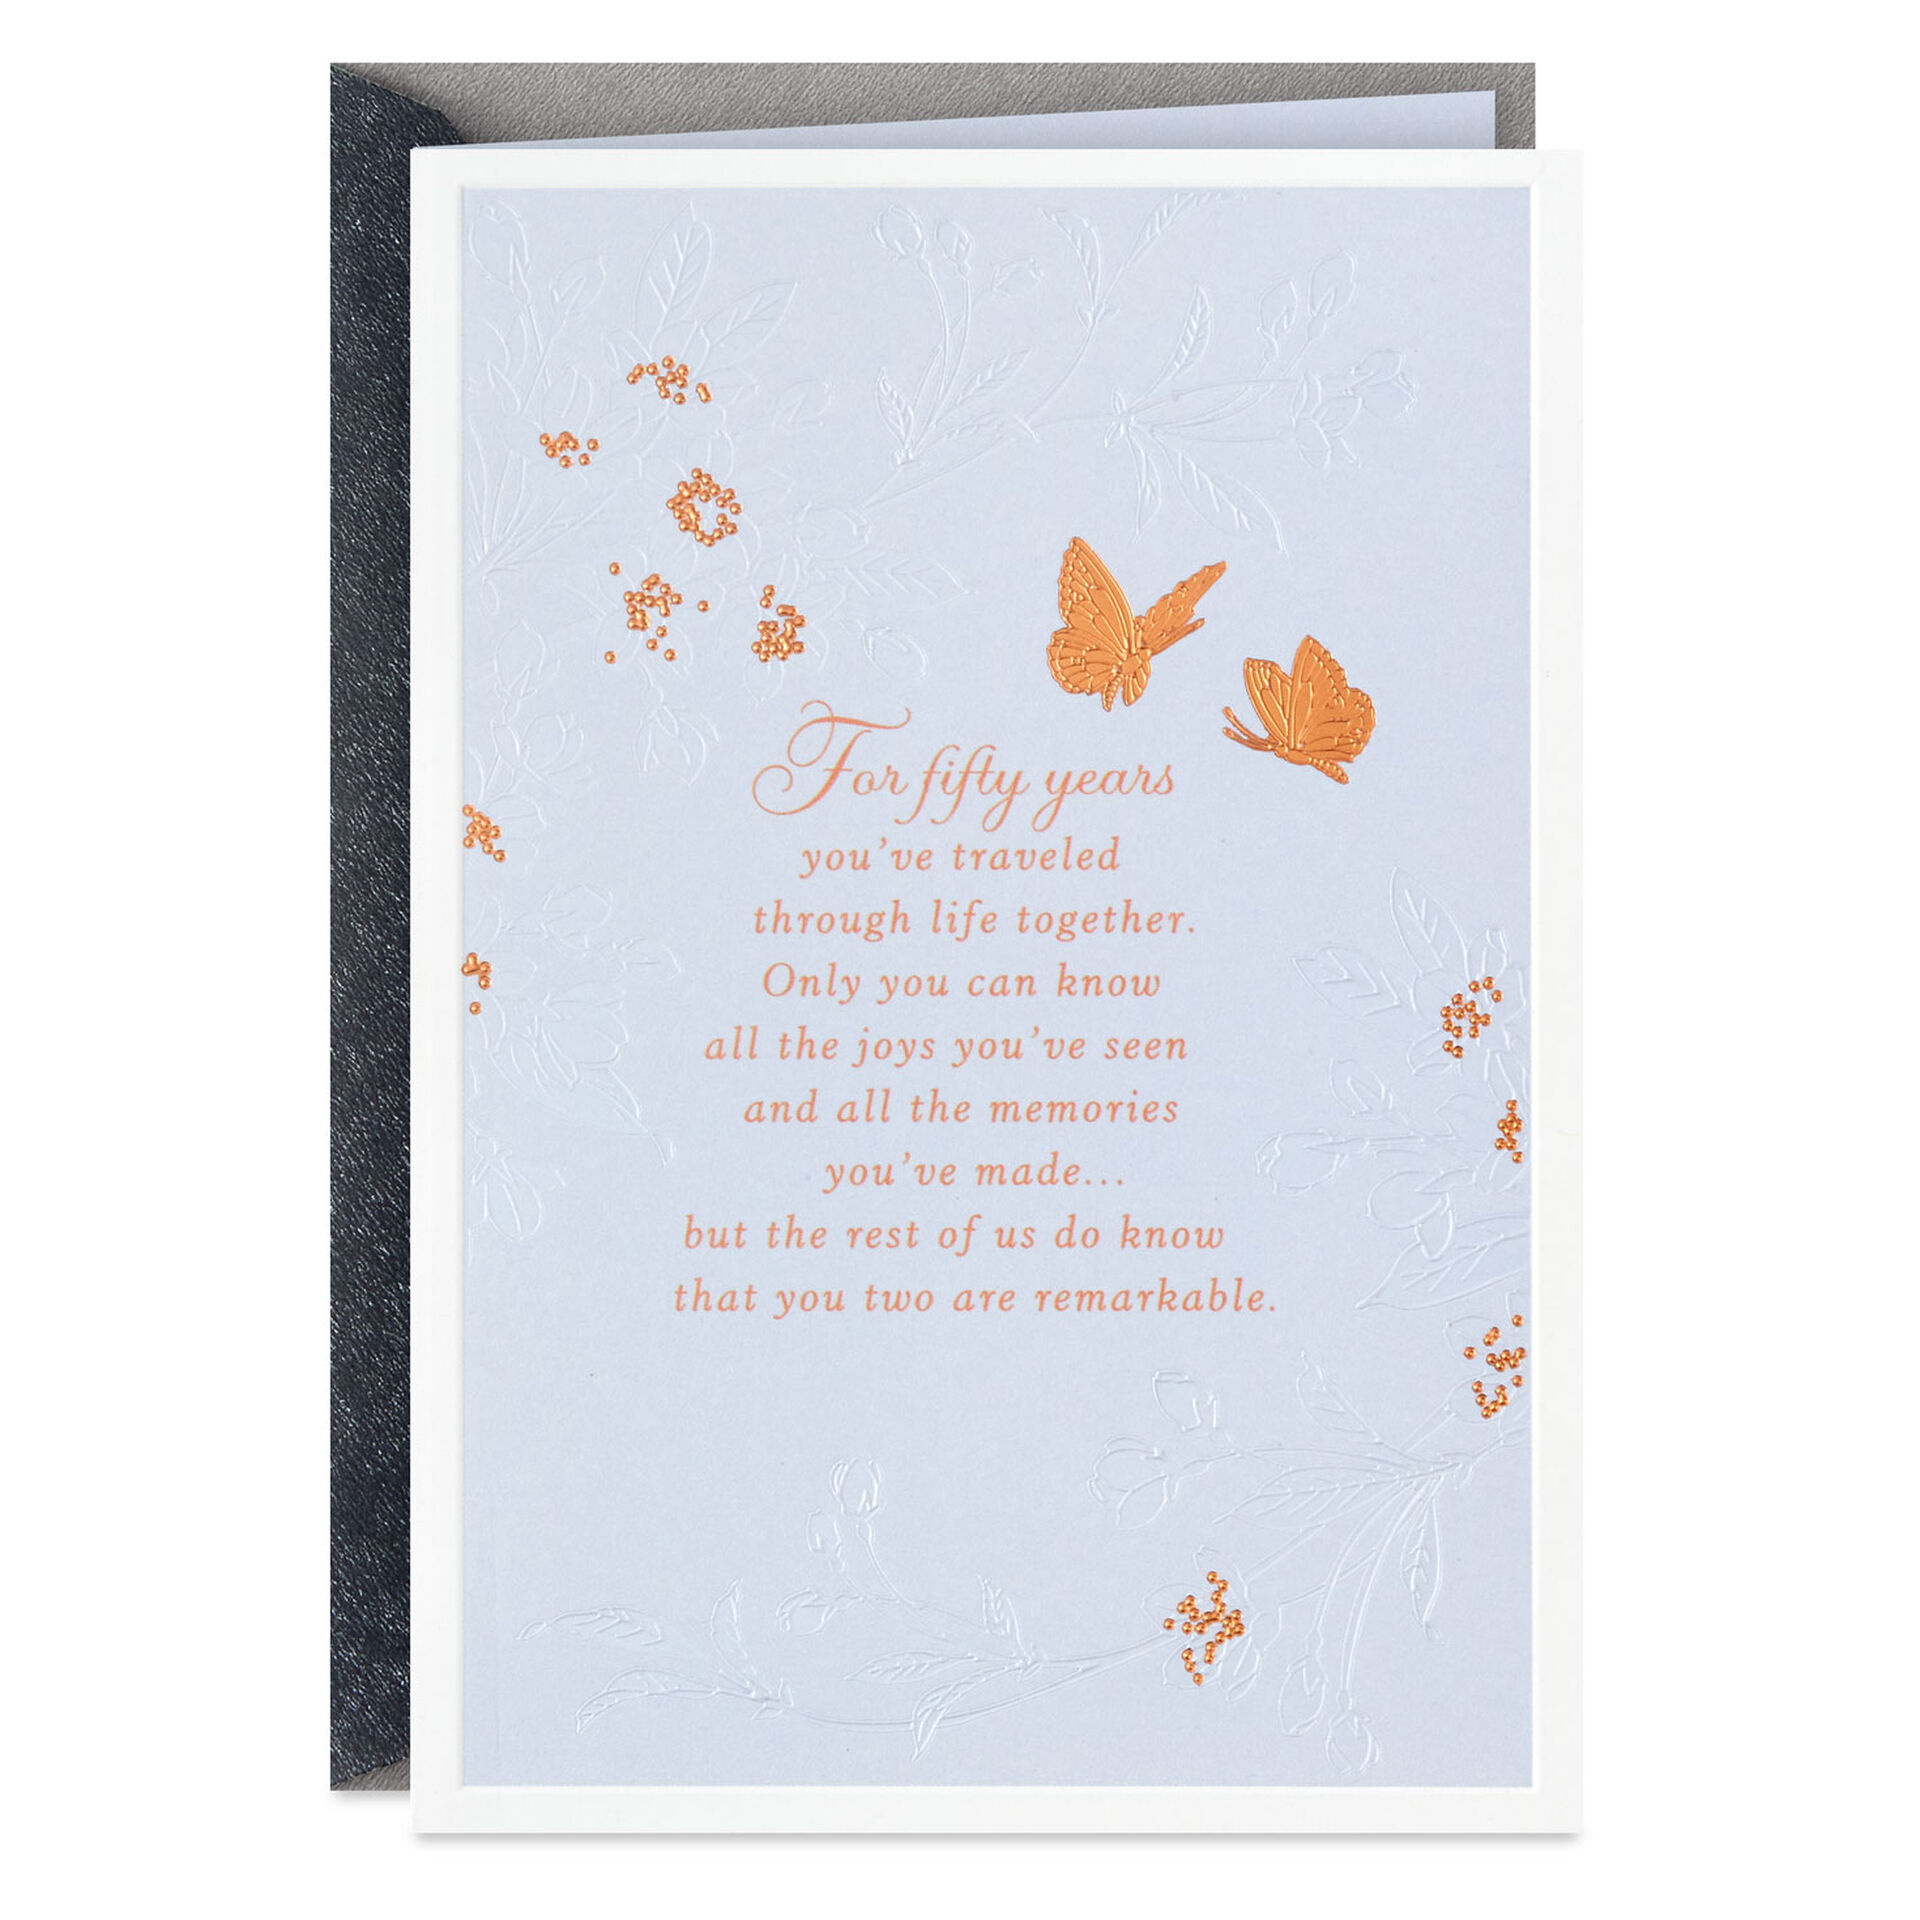 Butterfly-and-Flowers-50th-Anniversary-Card-for-Couple_499AVY9936_01